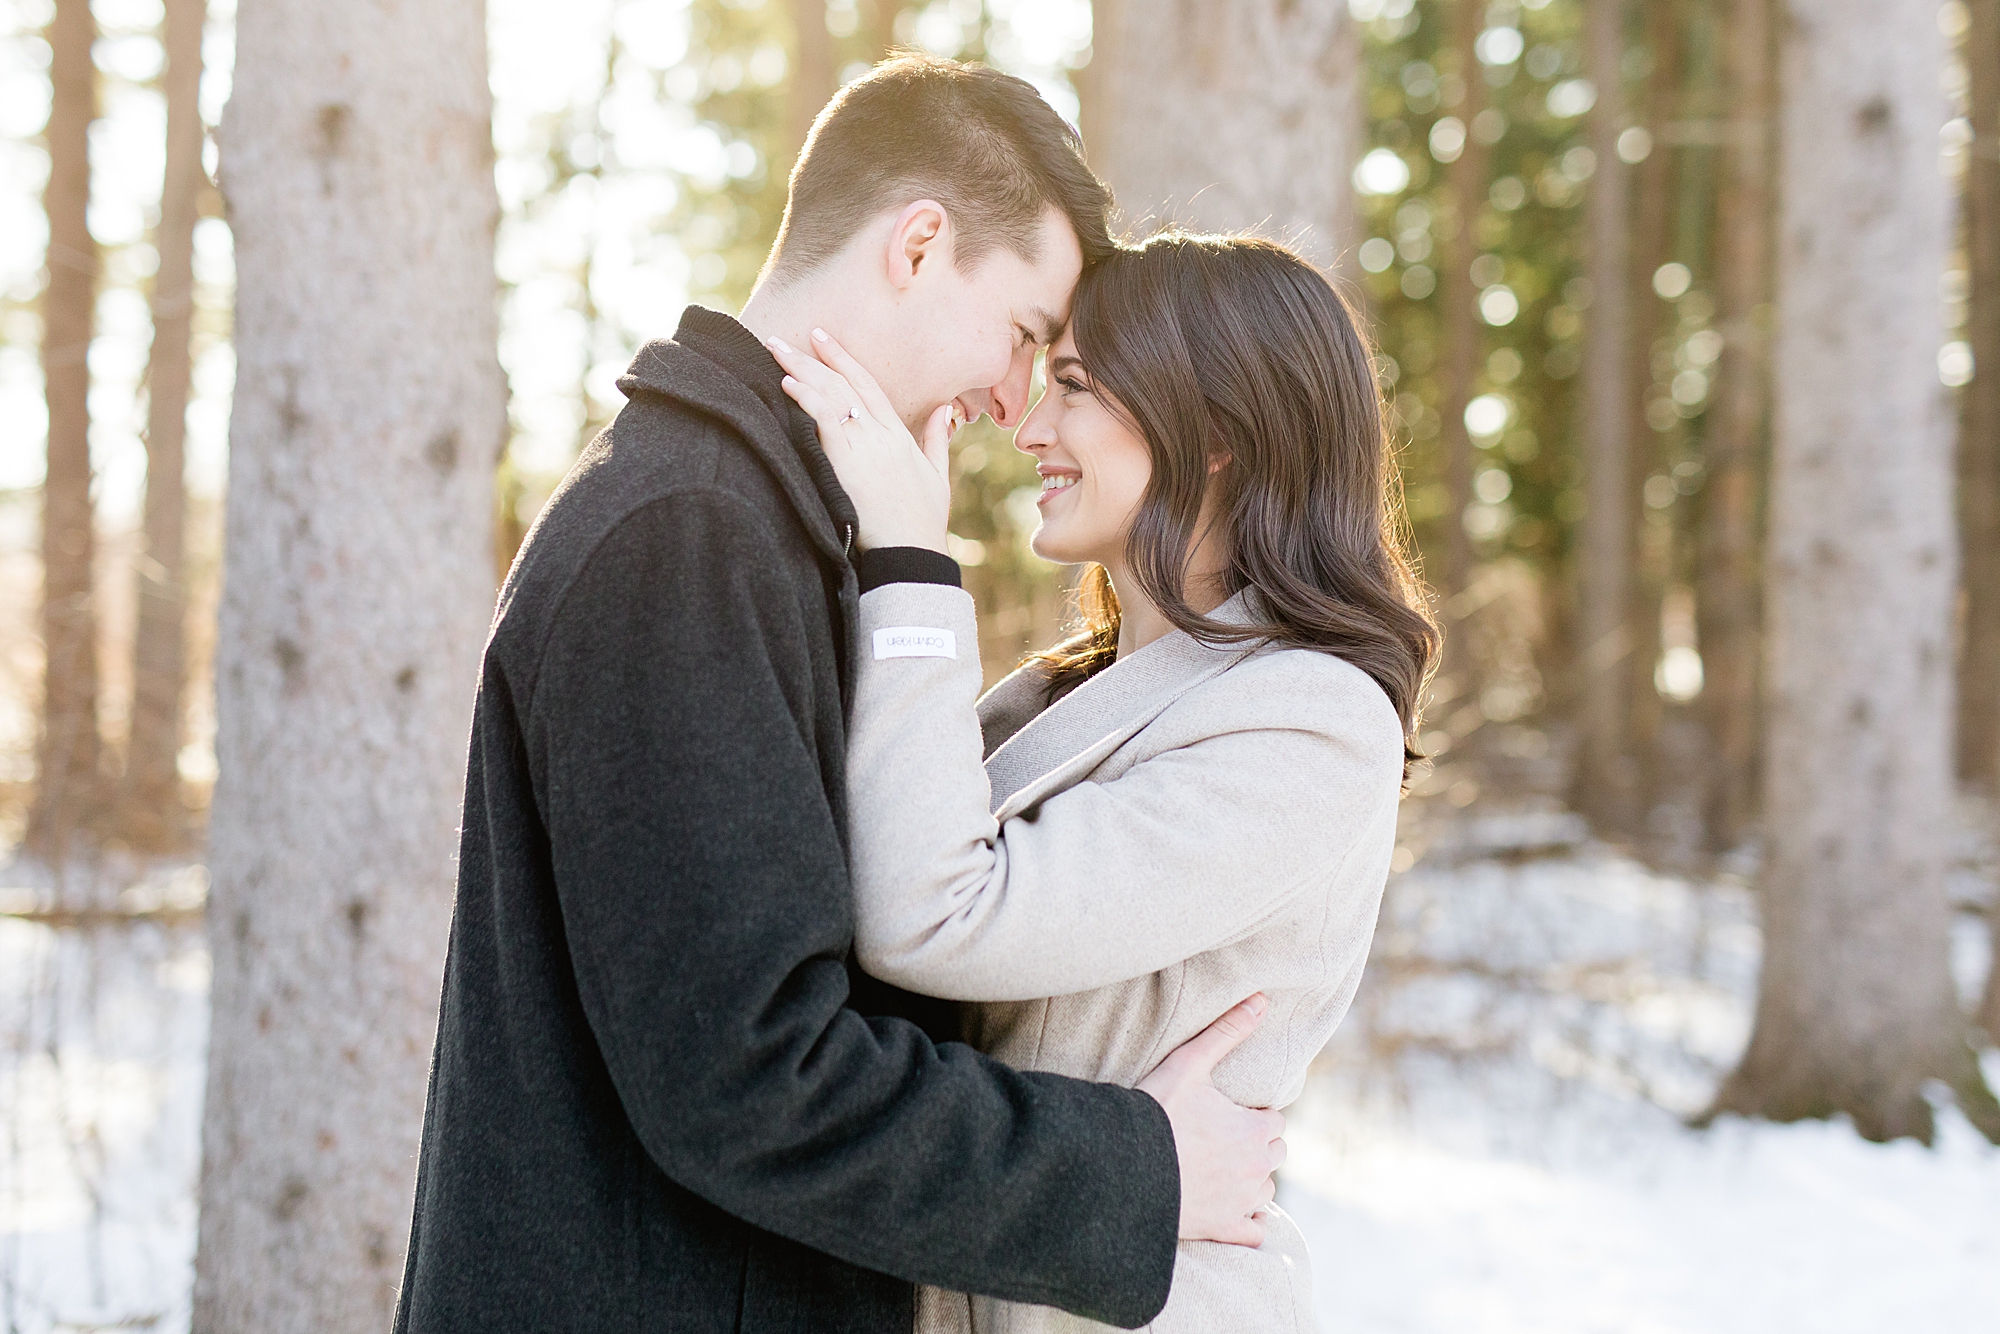 A snowy winter engagement at Stony Creek by Breanne Rochelle Photography.